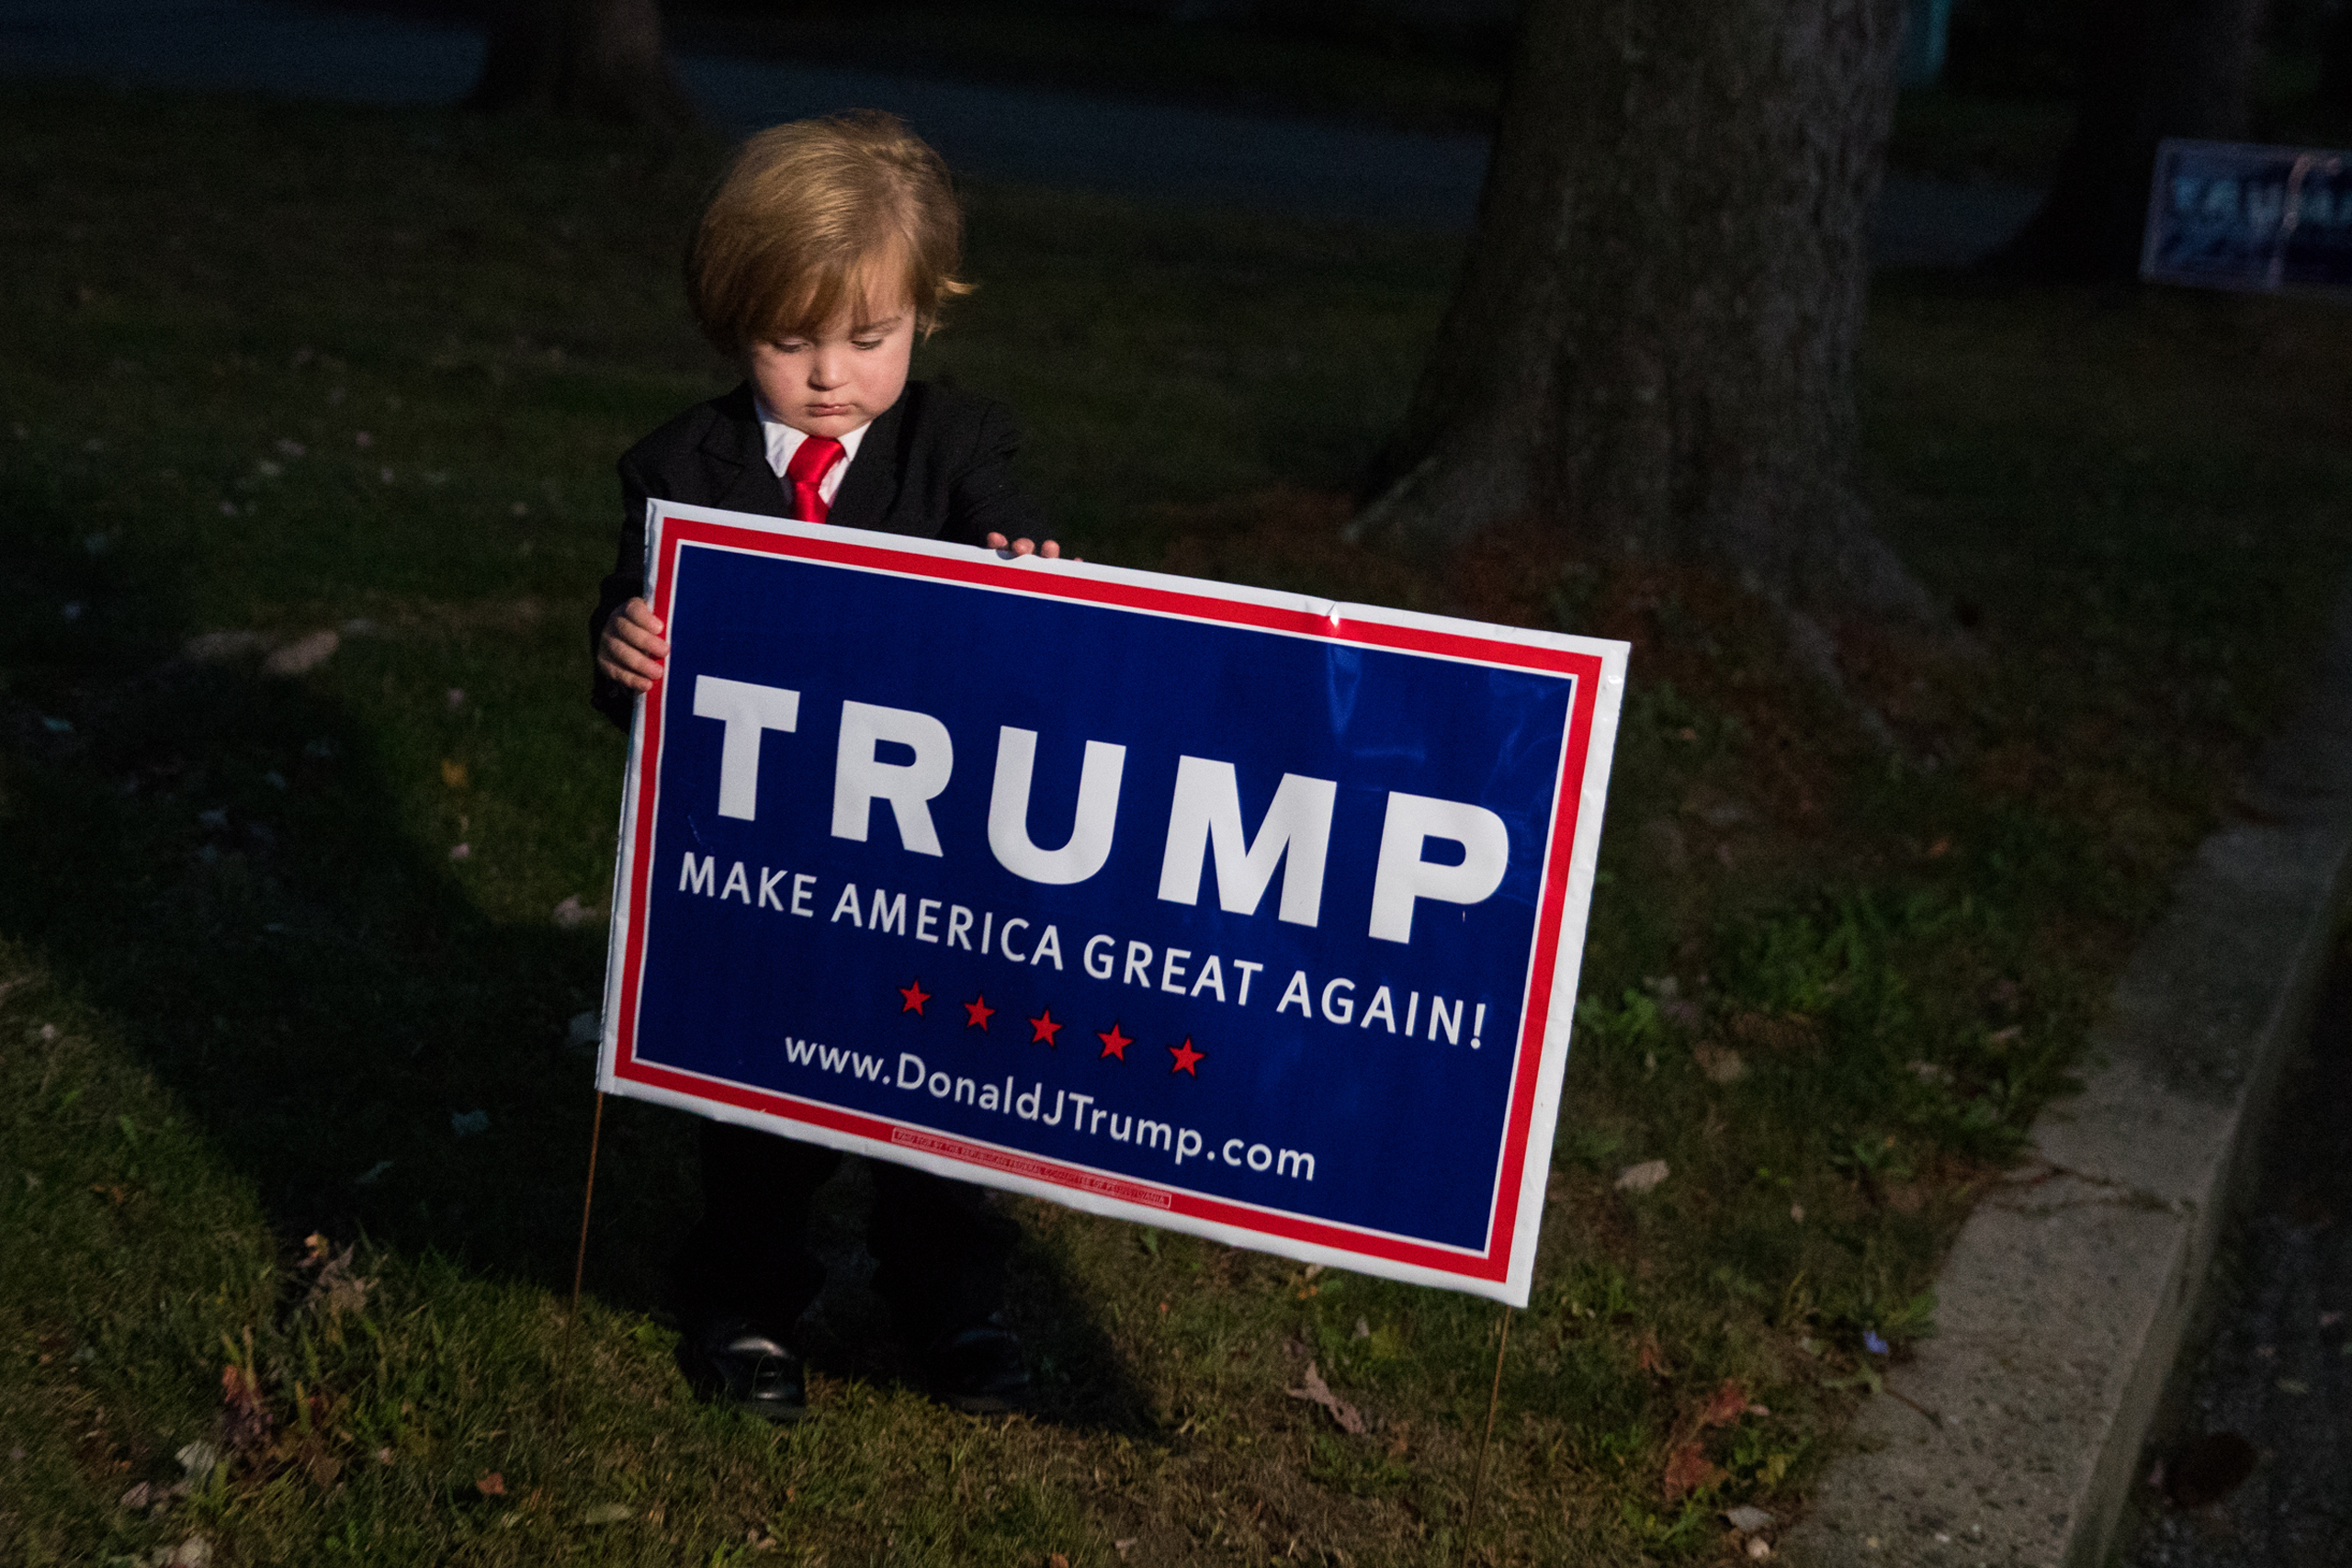 Hunter Tirpak, 2, is dressed as Donald Trump as he adjusts a campaign sign outside his home in Tuscarora, Pa., on Oct. 12, 2016.